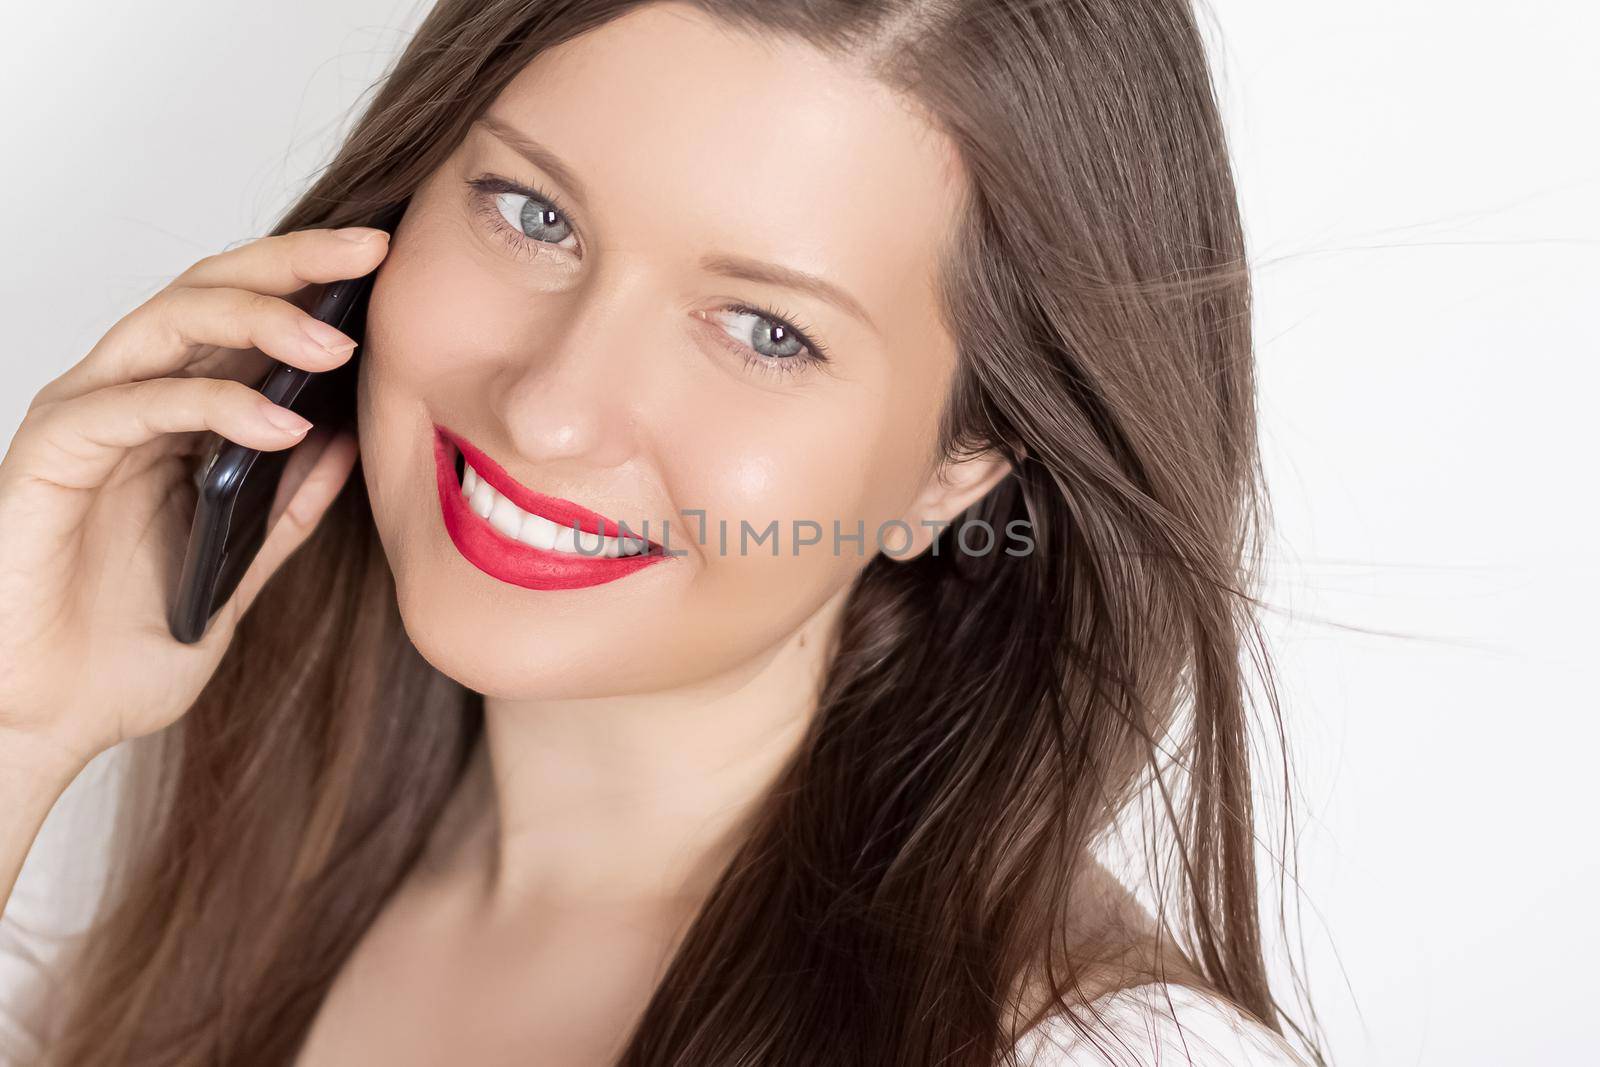 Happy smiling woman calling on smartphone, portrait on white background. People, technology and communication concept.